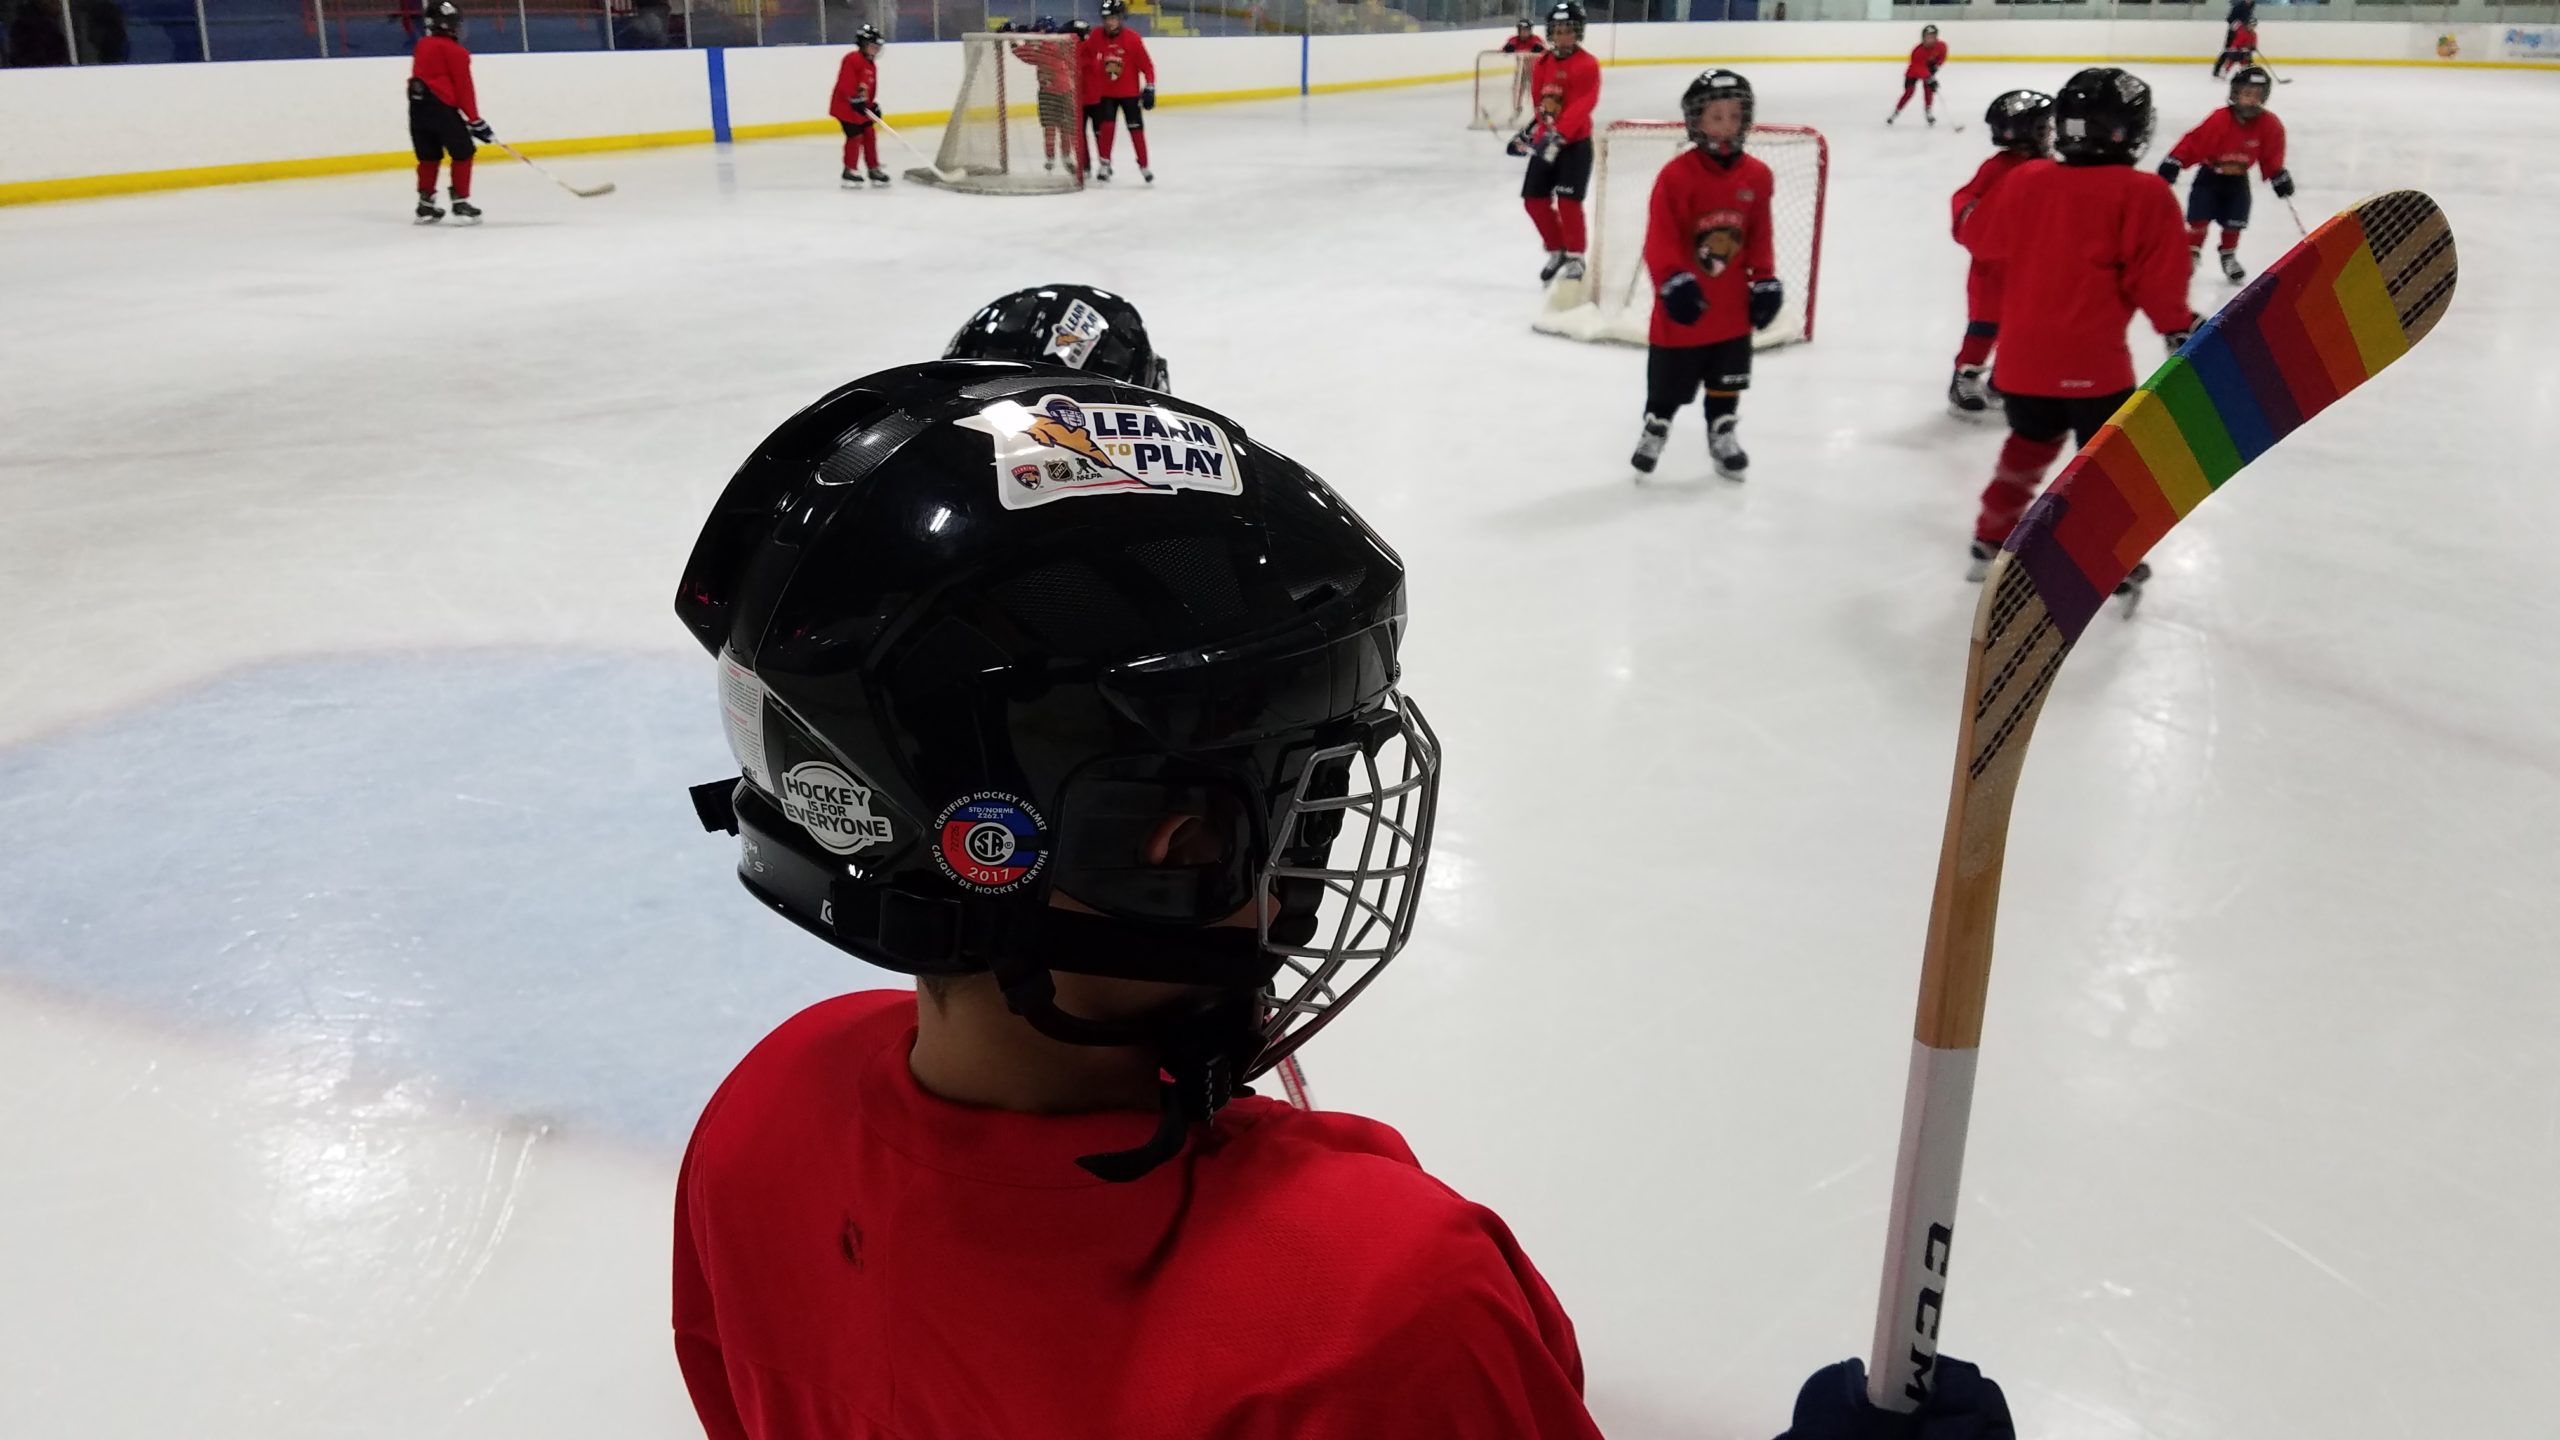 NHL® Games for Kids: Your Guide for Taking Little Ones